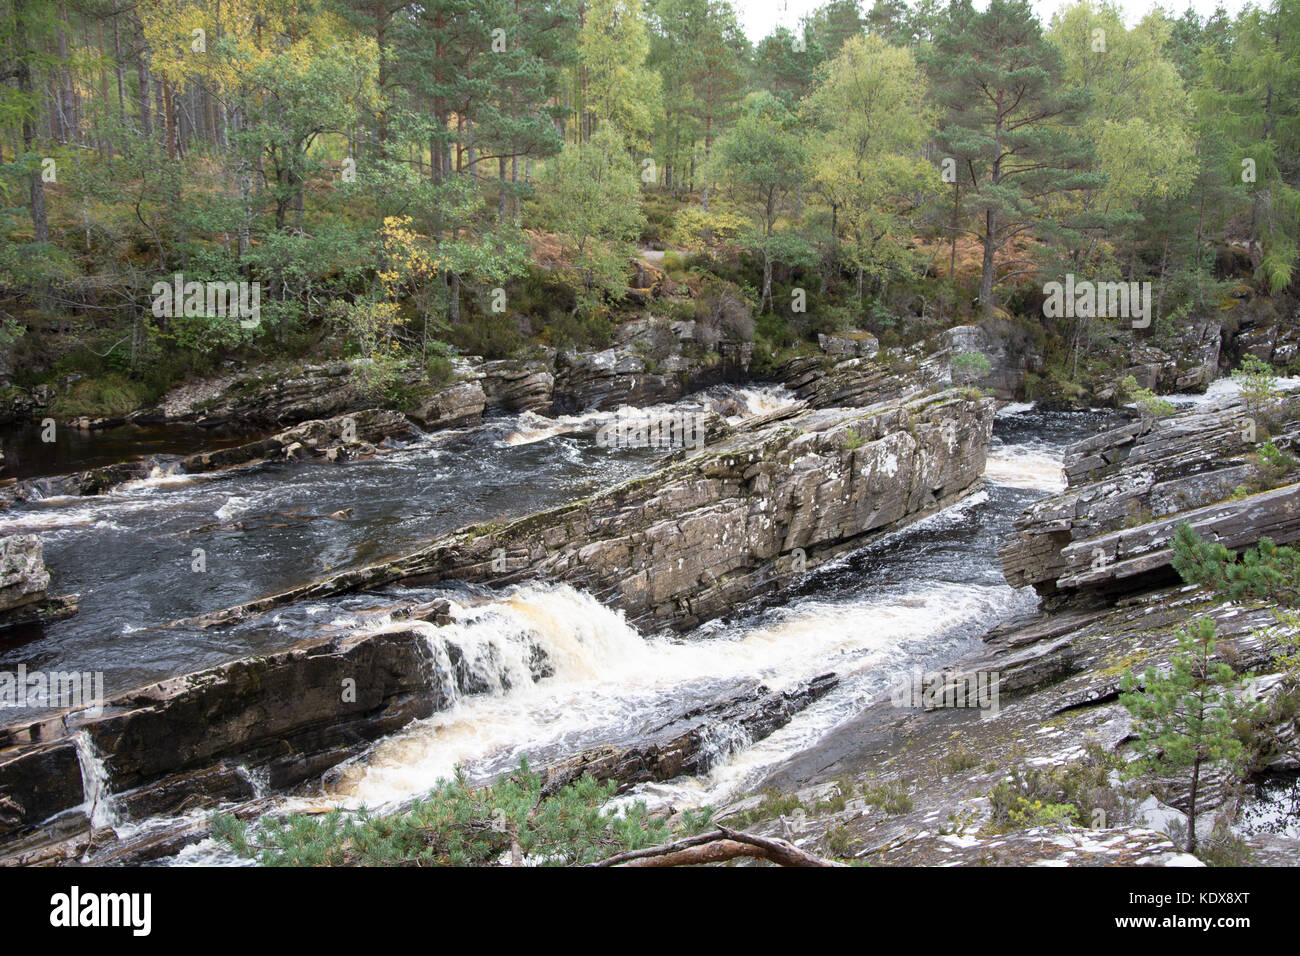 Water tumbling over rocks on Black Water River Stock Photo